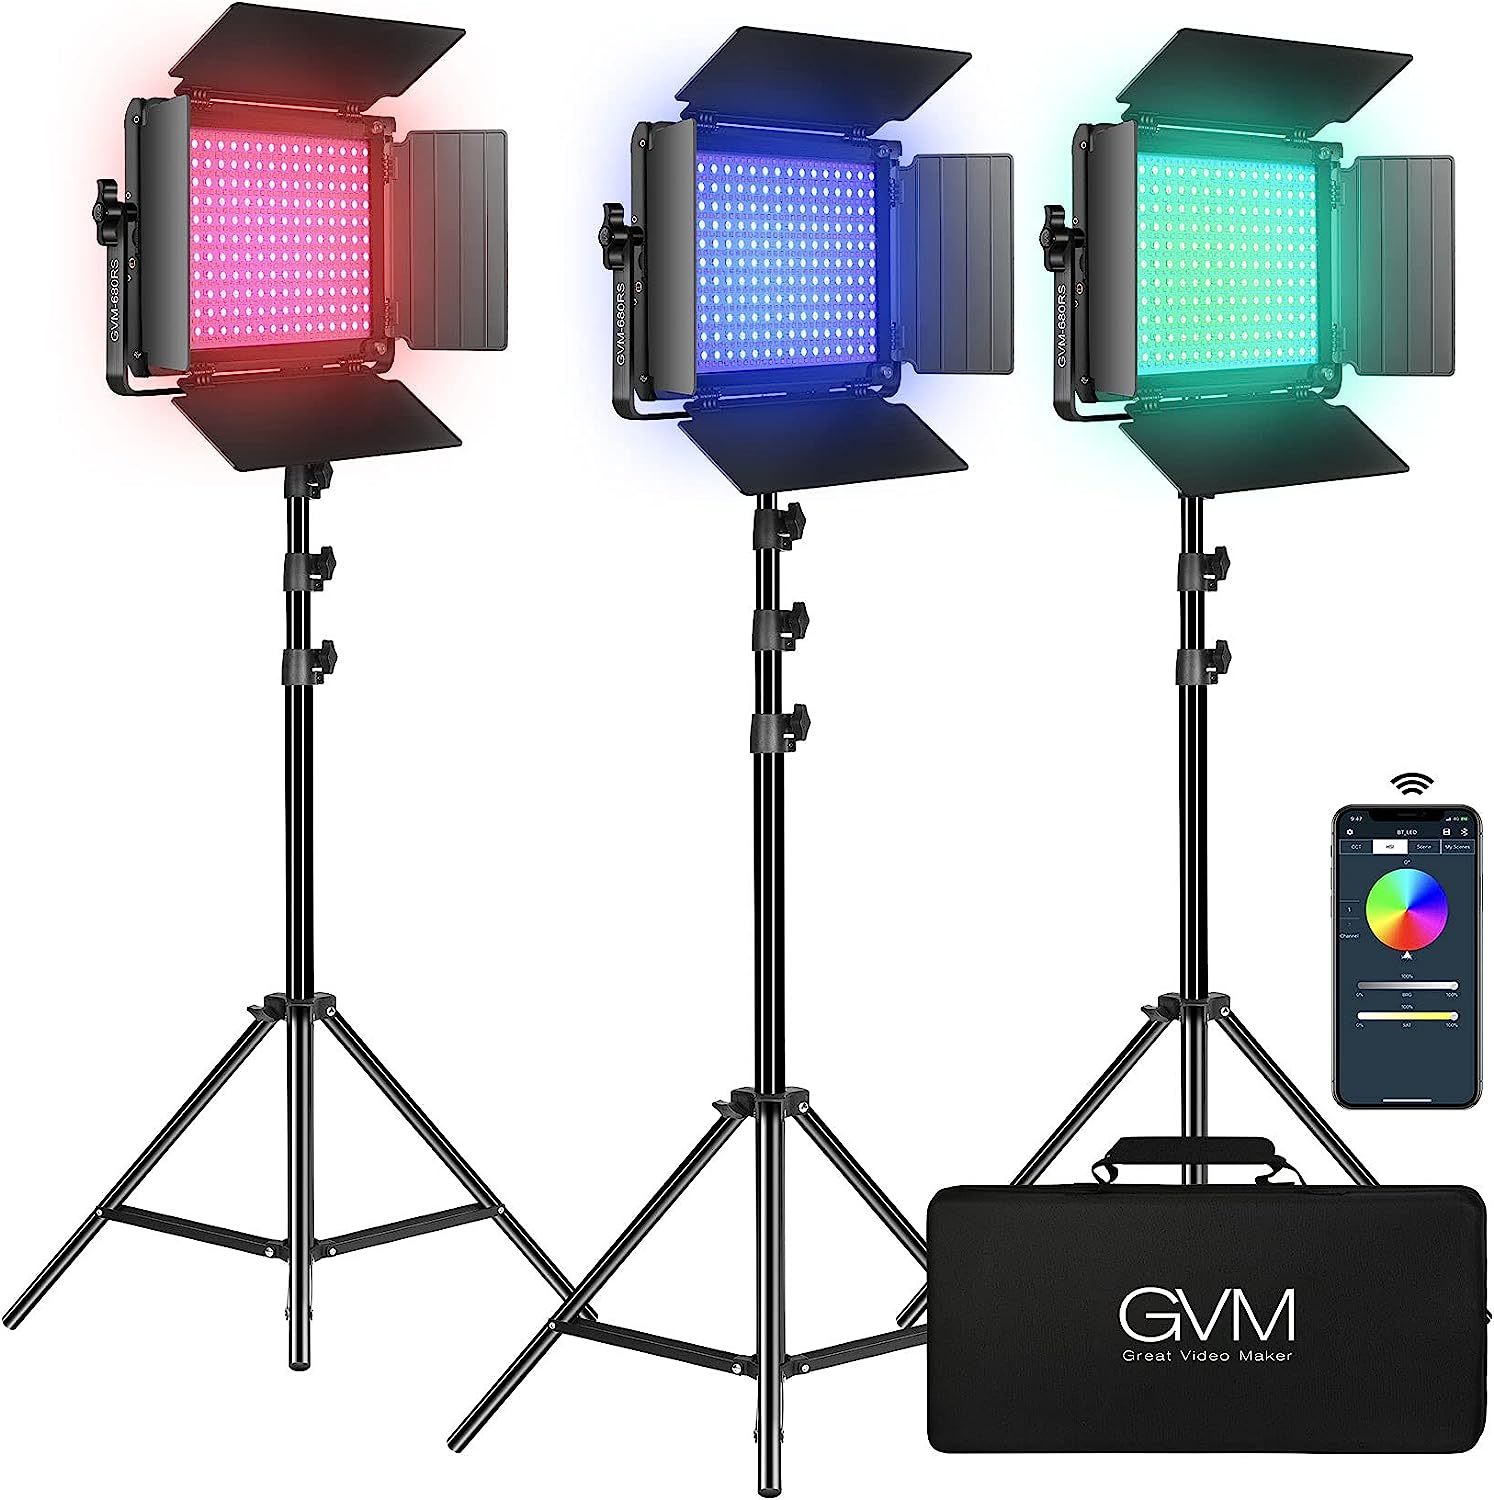 Primary image for Gvm Rgb Led Video Light Kit, Dimmable Photography Lighting With App, Conference.